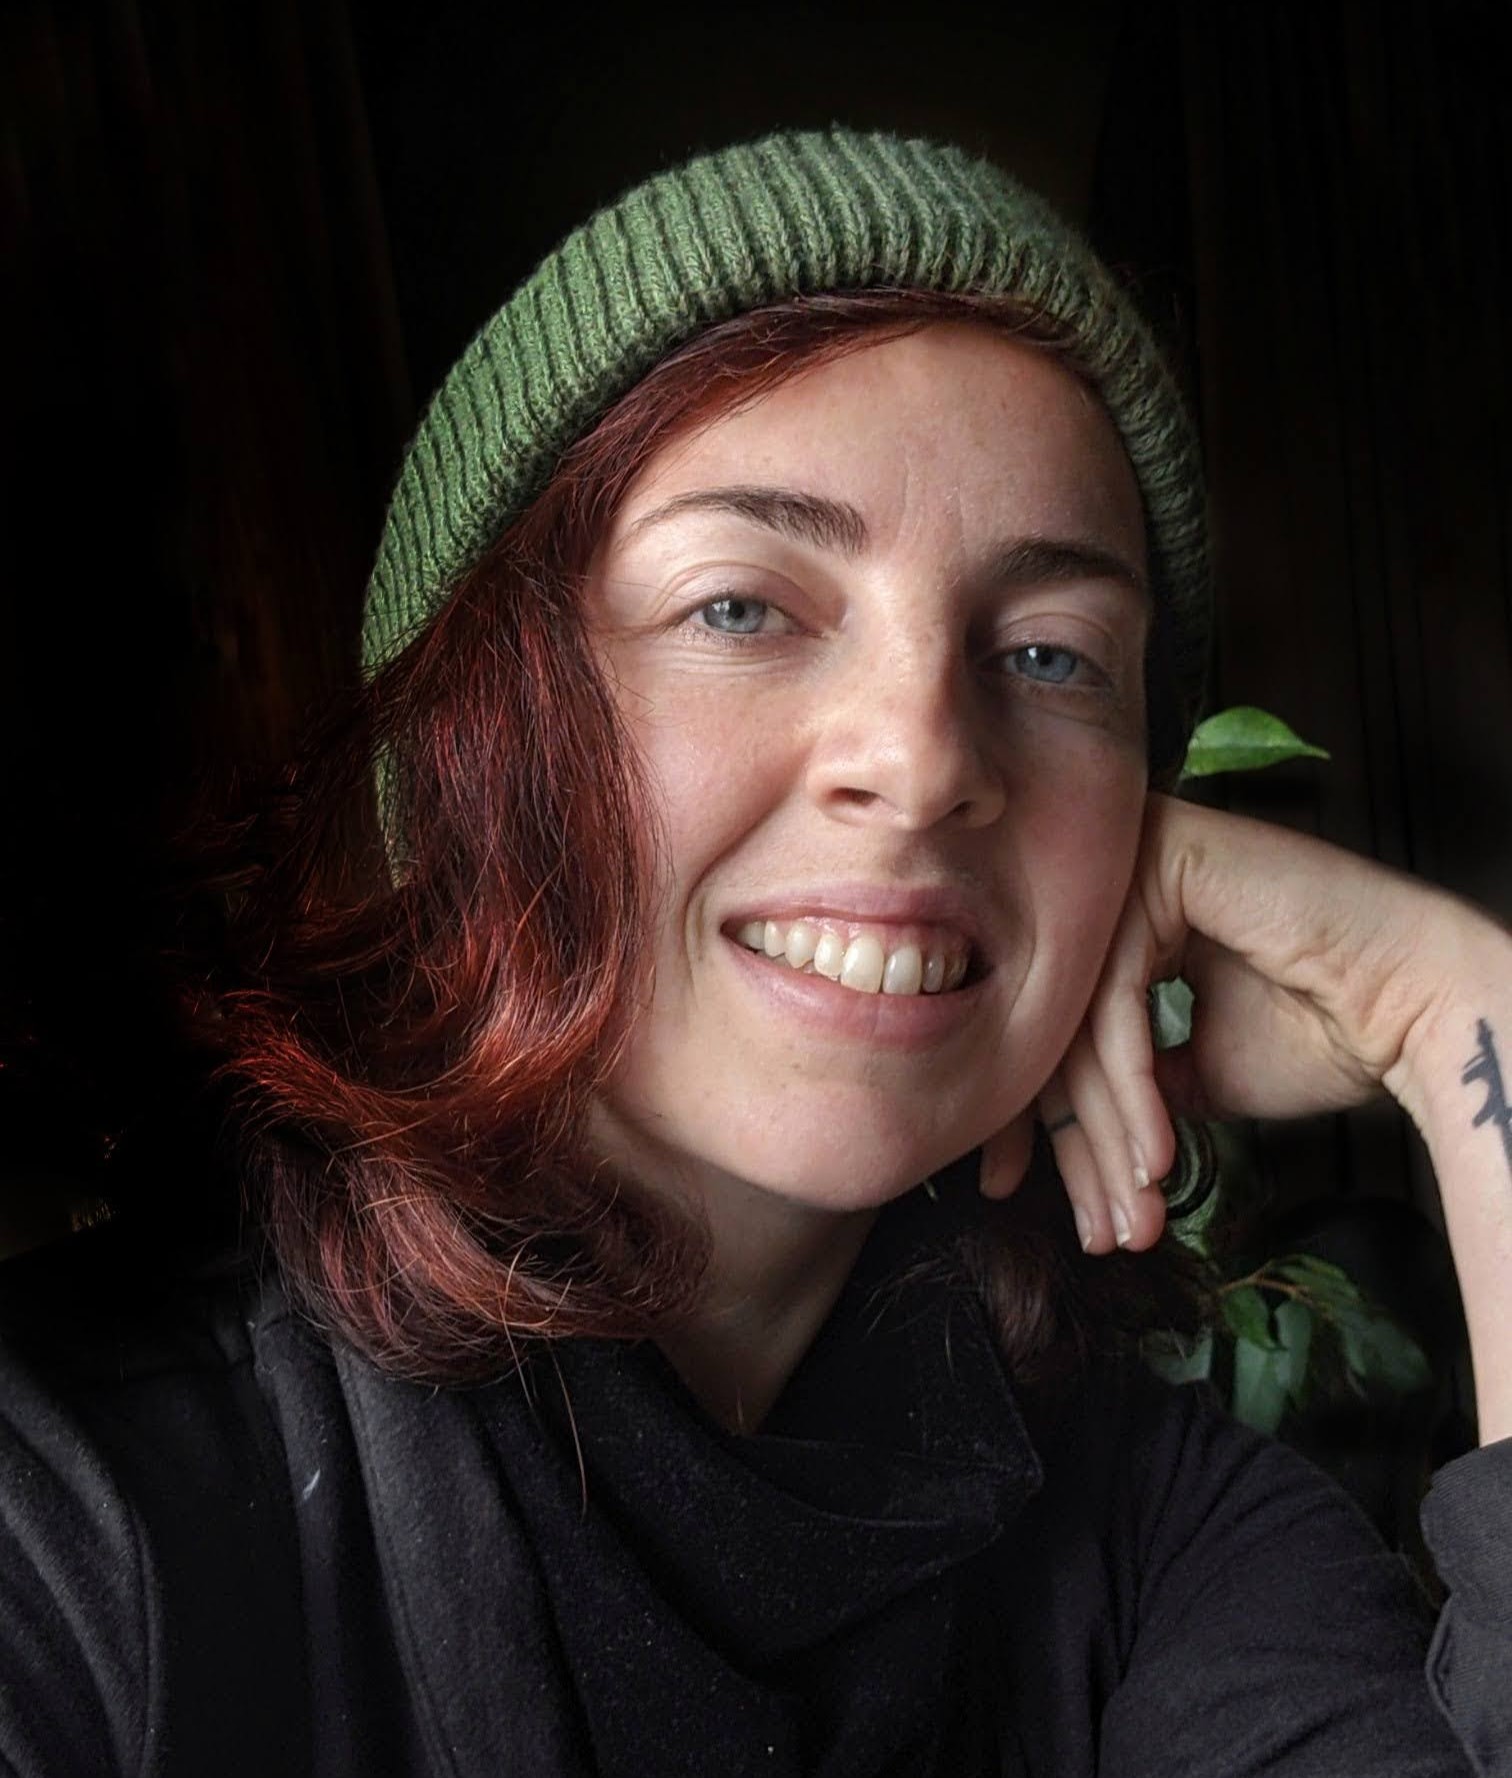 Kayla of the Midnight Rose Rebellion smiling at the camera and wearing a green beanie.